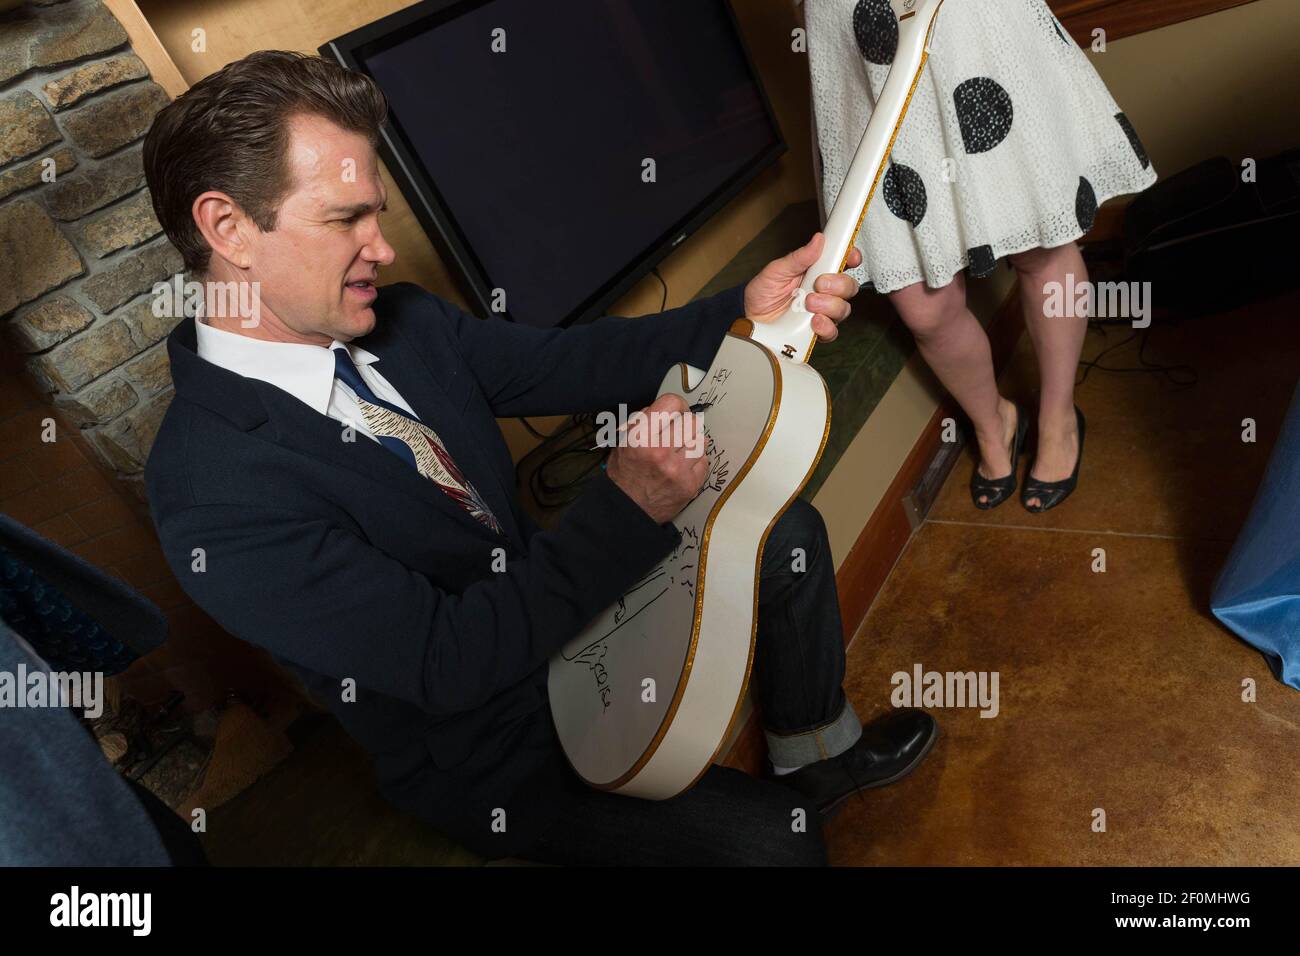 SAN FRANCISCO, CA - May 12 - Chris Isaak attends LymeAid 2018 on May 12th 2018 at Private Residence in Portola Valley, CA on May 12, 2018 (Photo - Andrew Caulfield for Drew Altizer / Sipa USA) Stock Photo